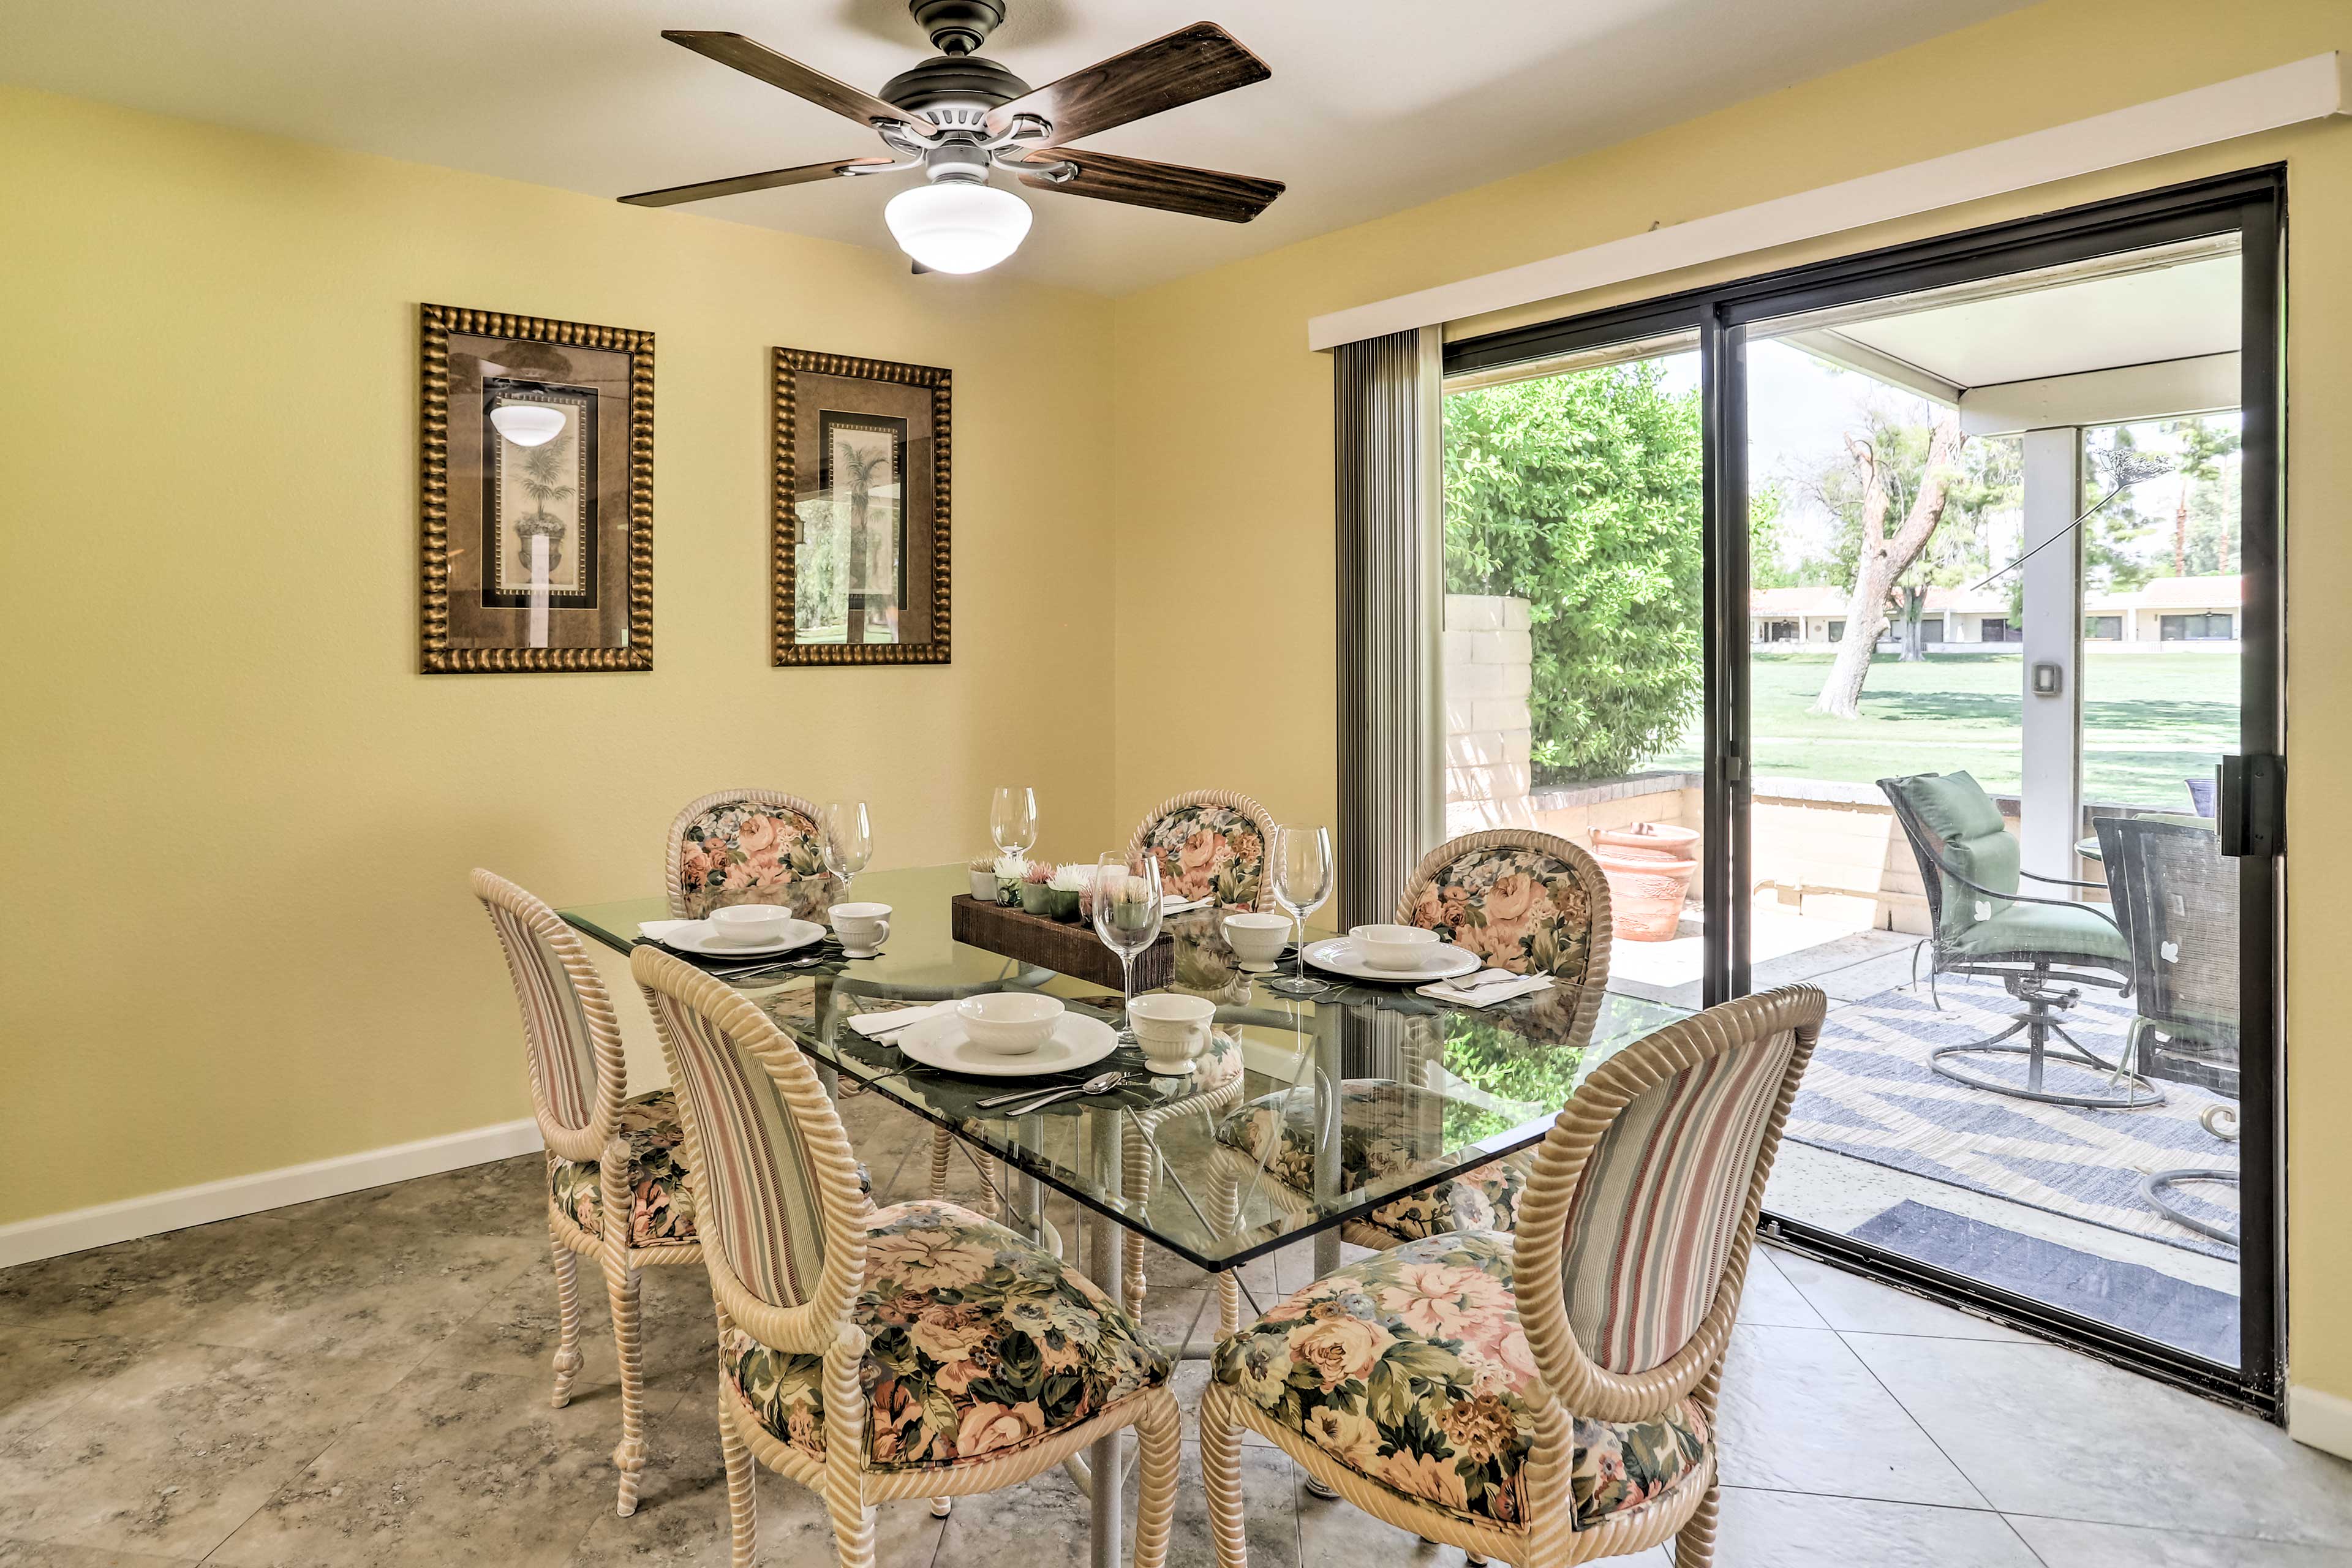 Dining Area | Central Air Conditioning